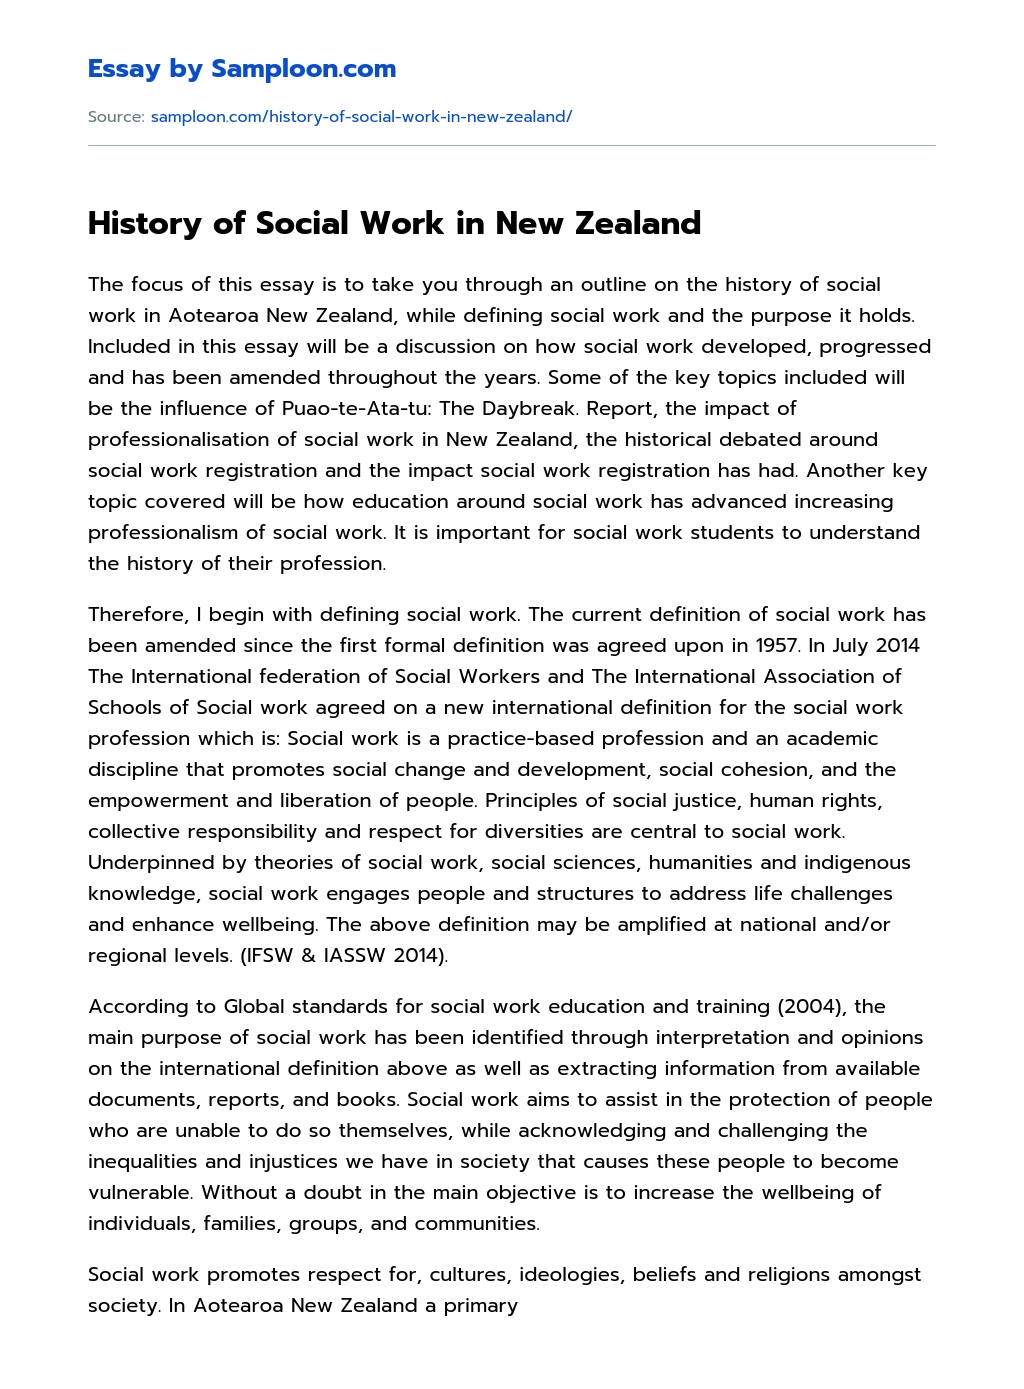 History of Social Work in New Zealand essay